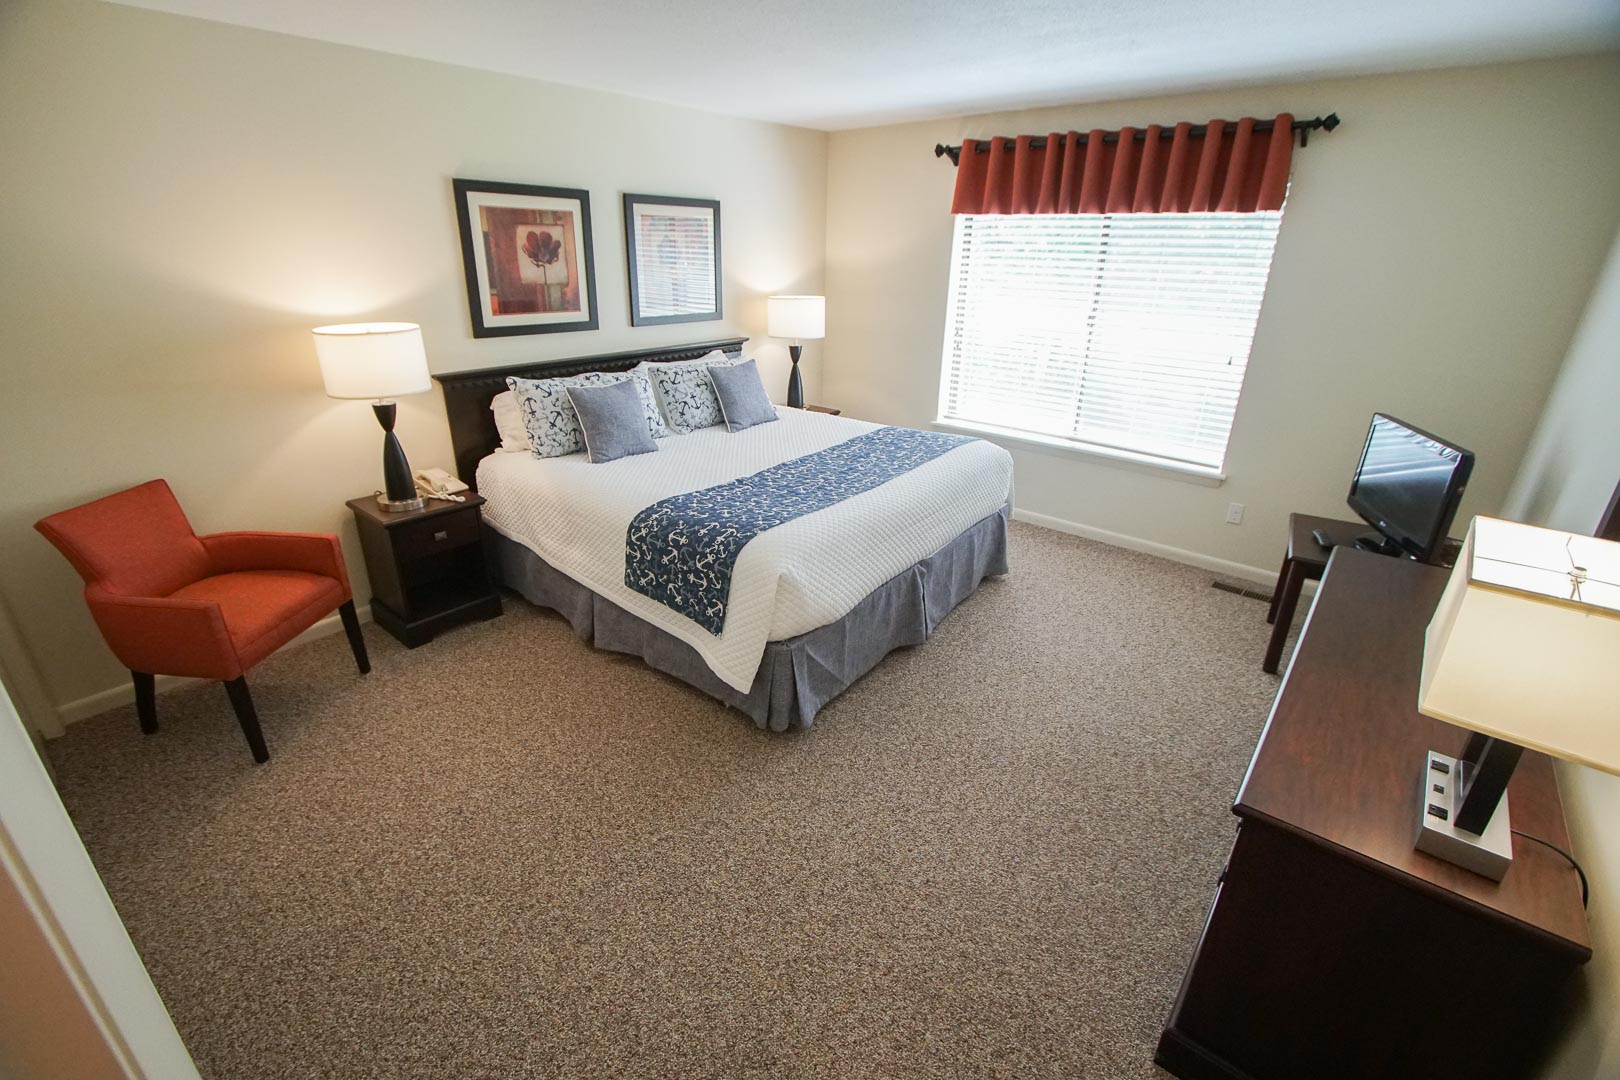 A spacious master bedroom at VRI's Brewster Green Resort in Massachusetts.